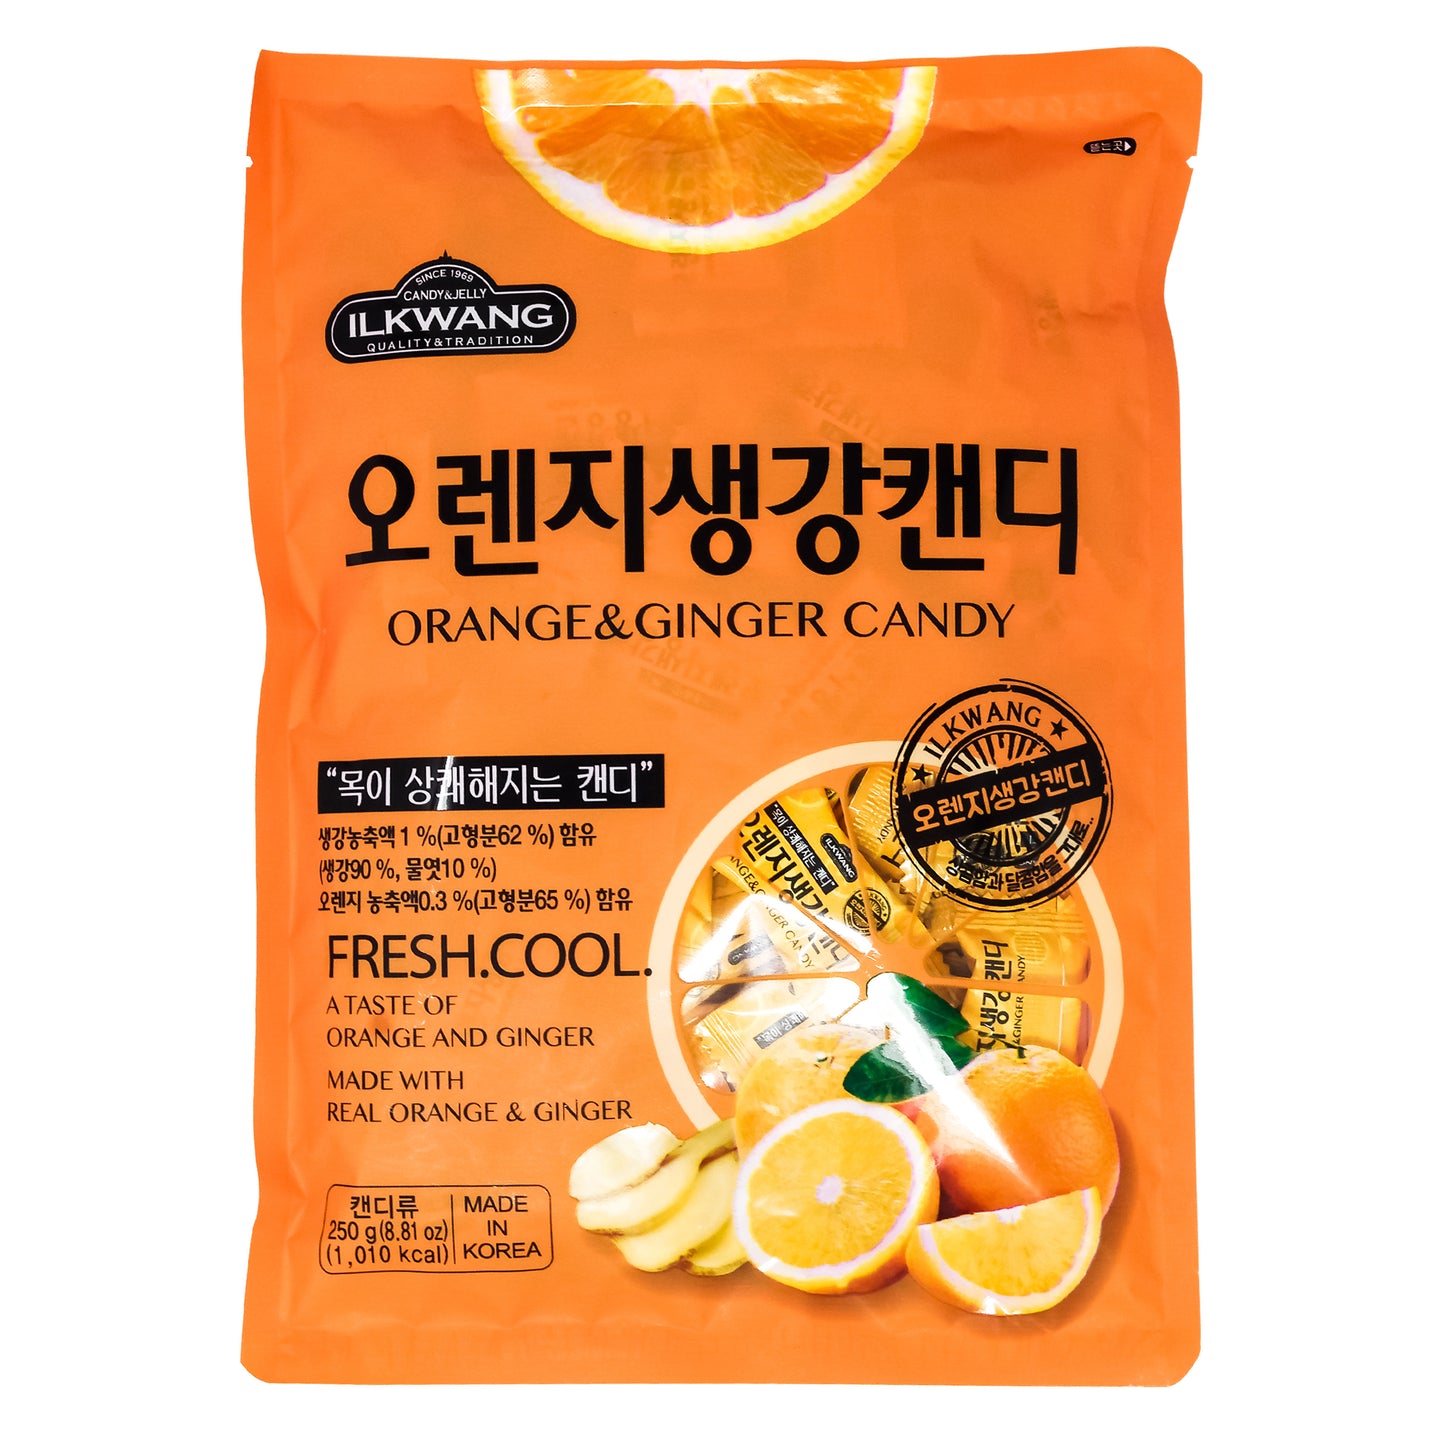 Orange GINGER Candy Hard Drops Tummy Drops Chimes Natural Chews Chewy Candy Nausea Relief Preggie Pops 8.8oz (250 grams) 2pack Product of Korea_Individually Wrapped (Orange Ginger)